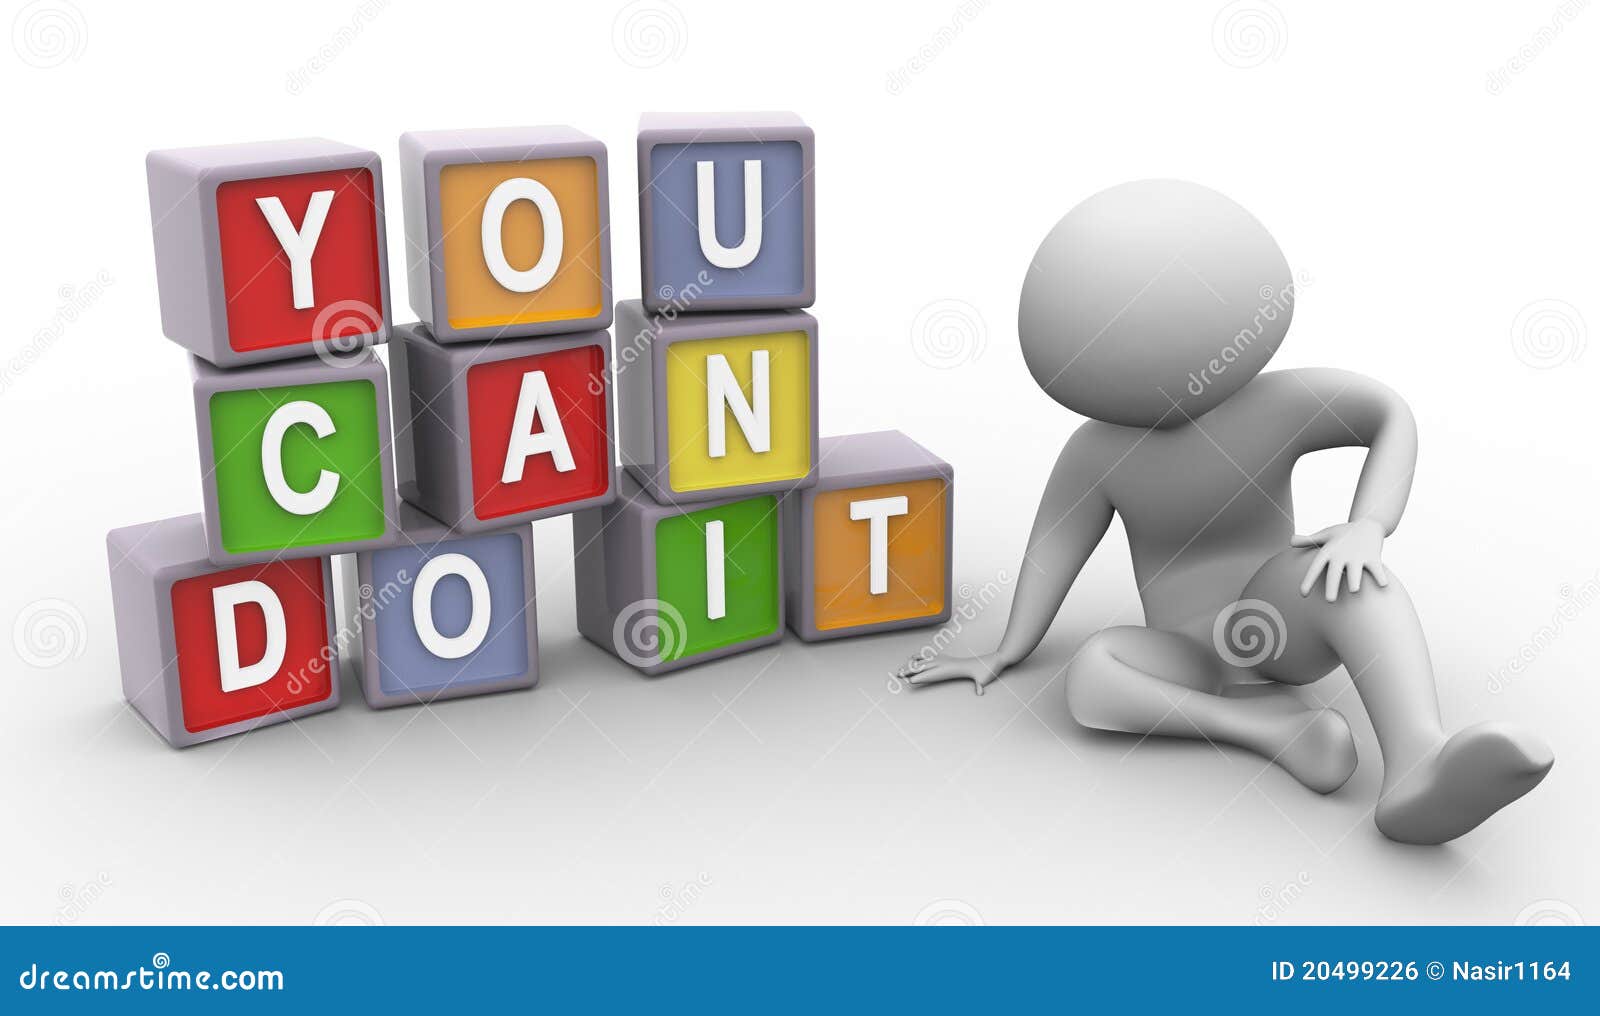 clipart you can do it - photo #8